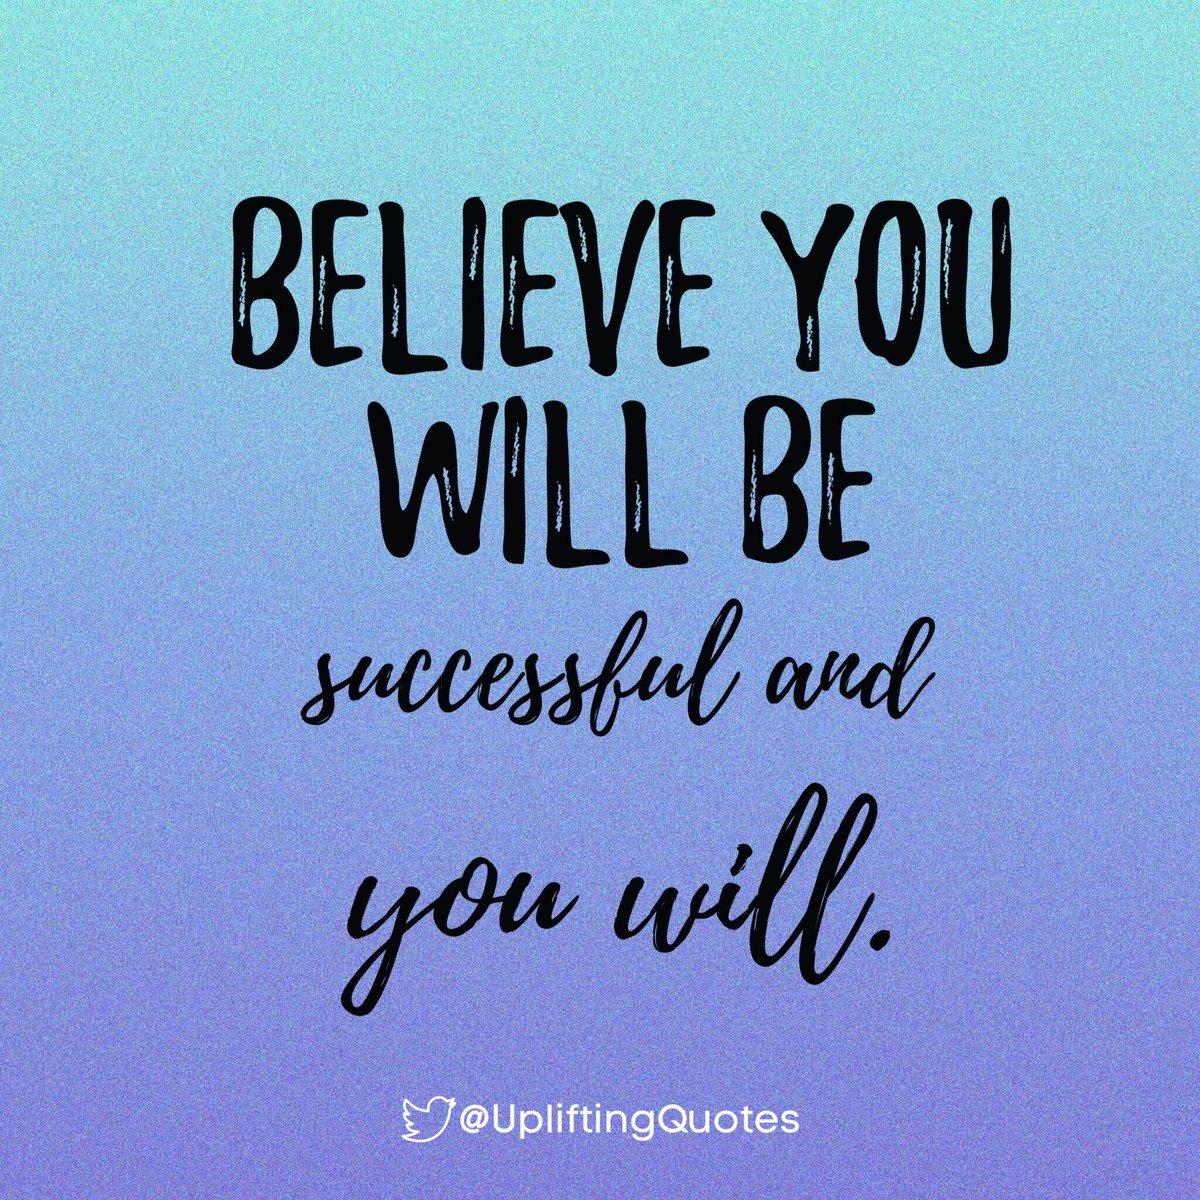 Believe you will be successful and you will. #believe #besuccessful 
via @UpliftingQuotes RT @positive72349 

#MondayMotivation ✨